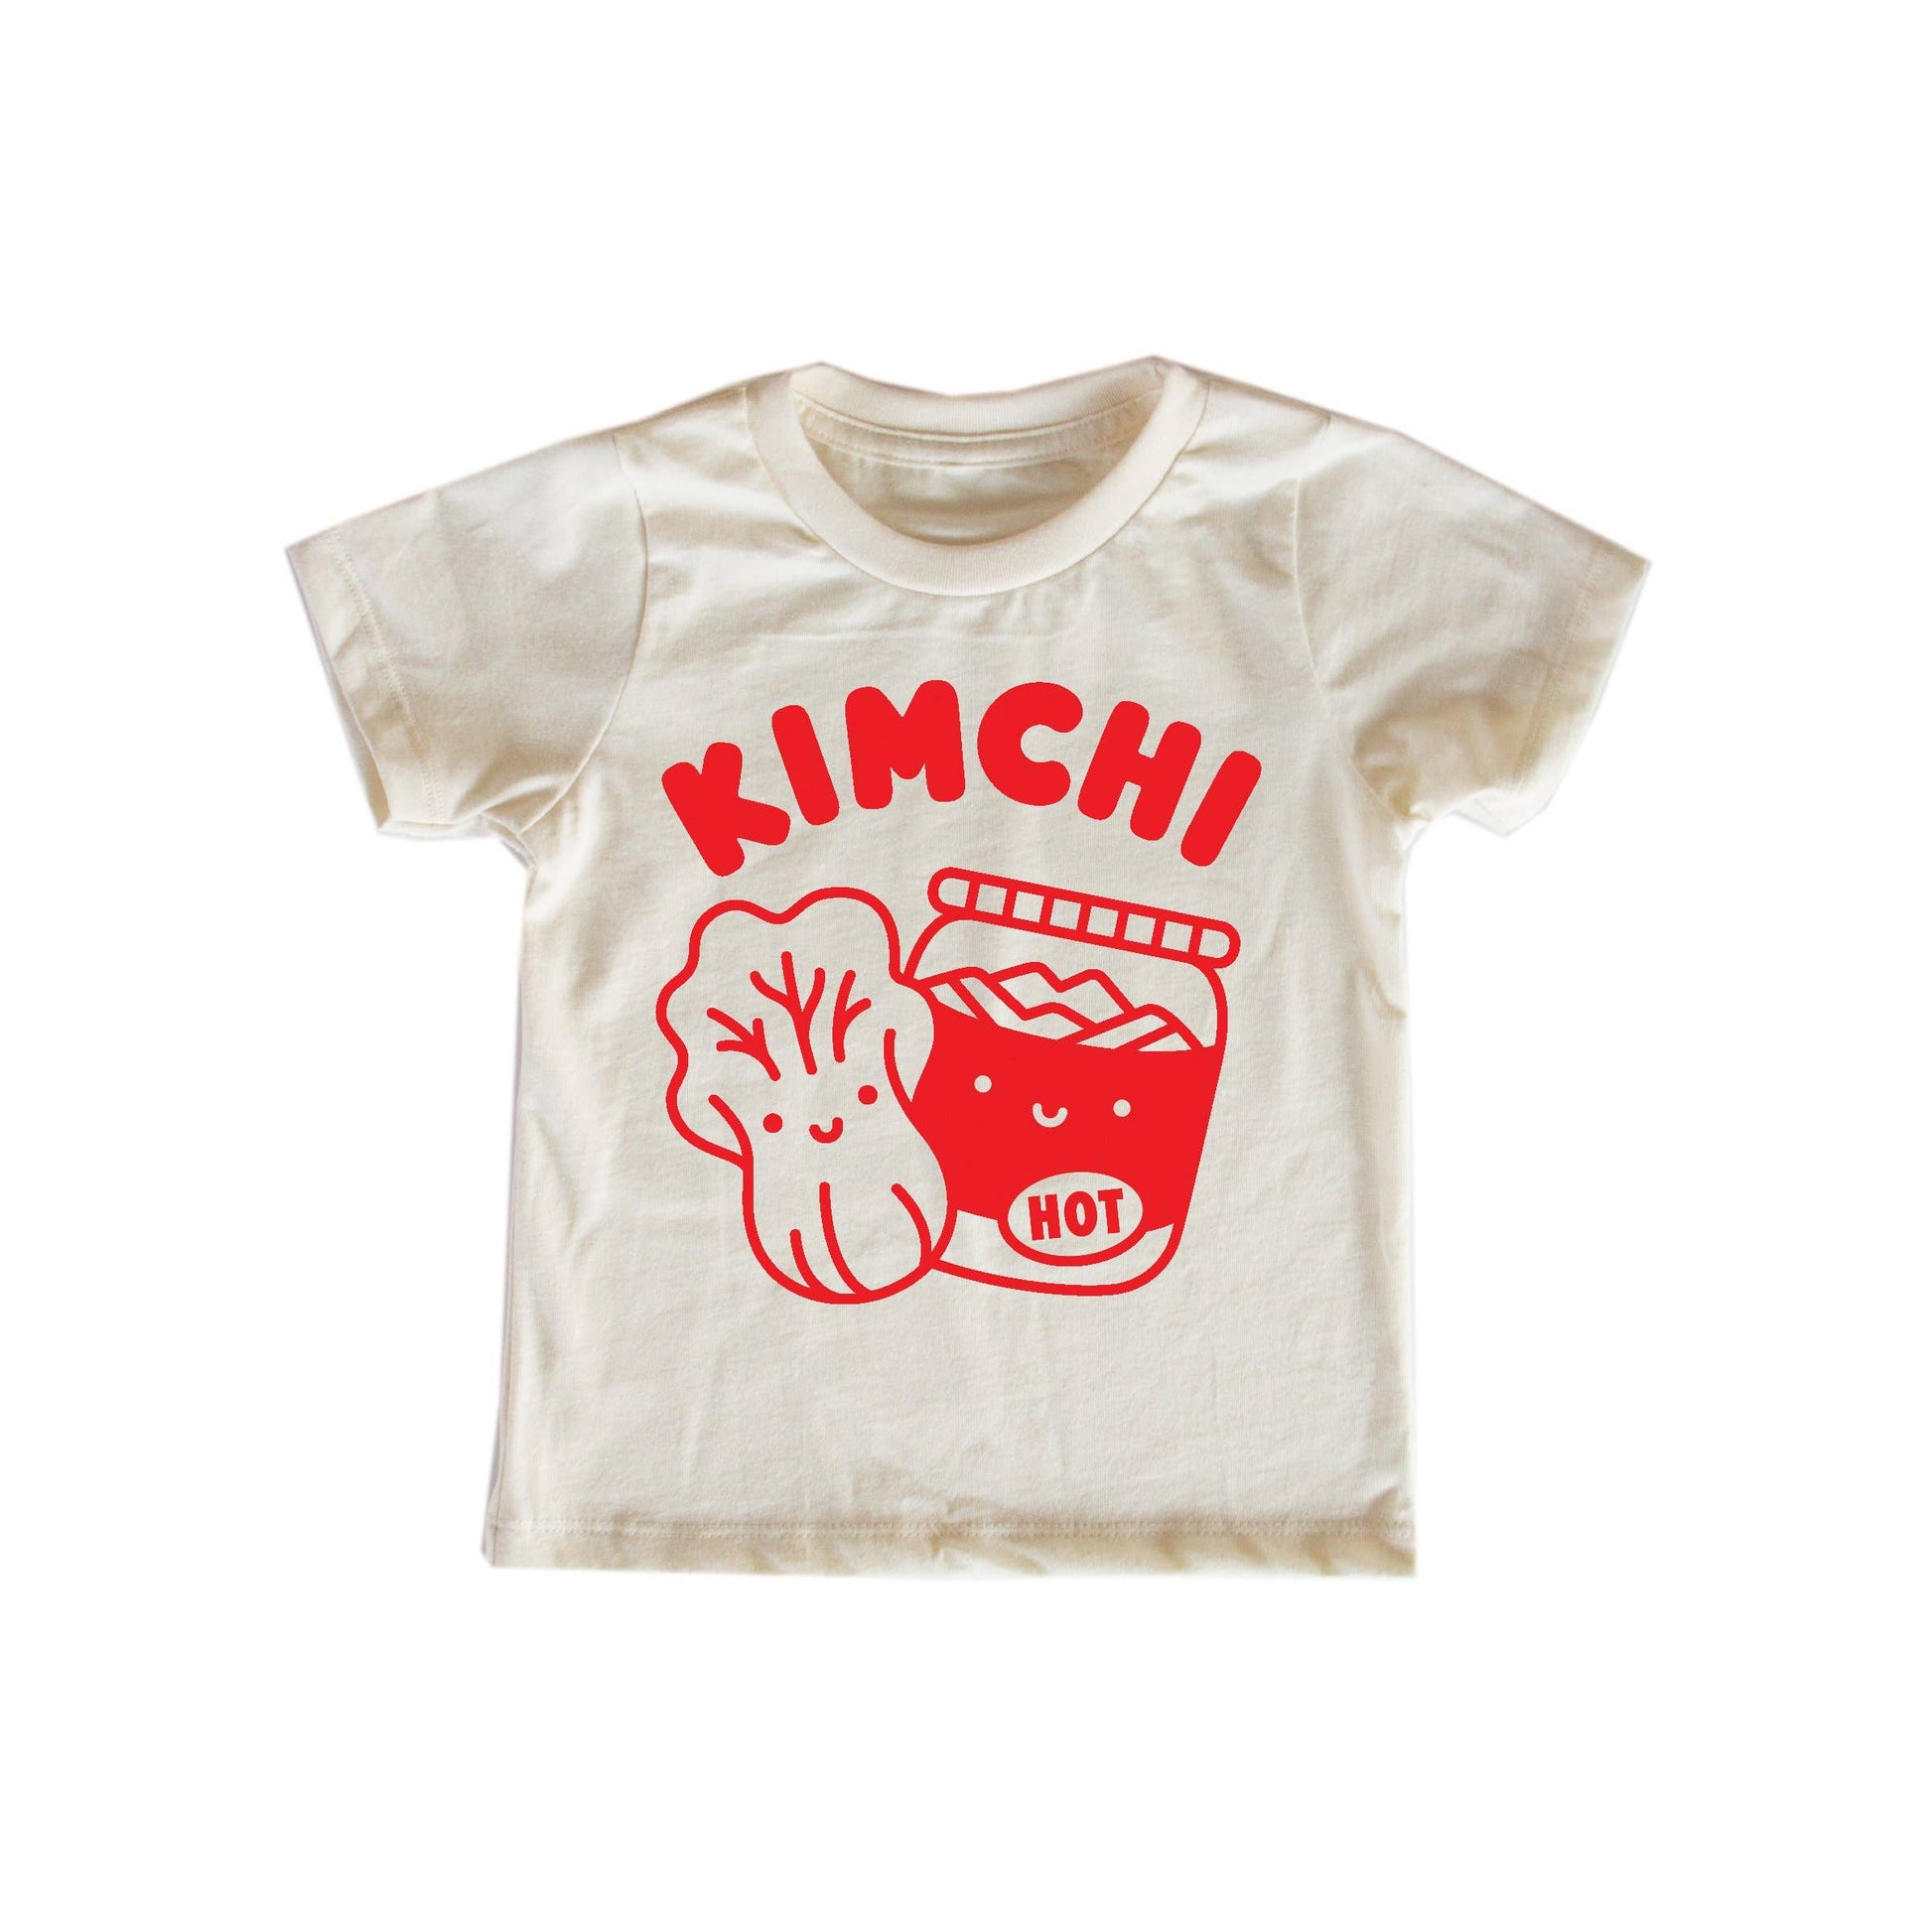 Baby size KImchi Tee -- says Kimchi across the chest with a cabbage next to a pickling jar, all in red ink 